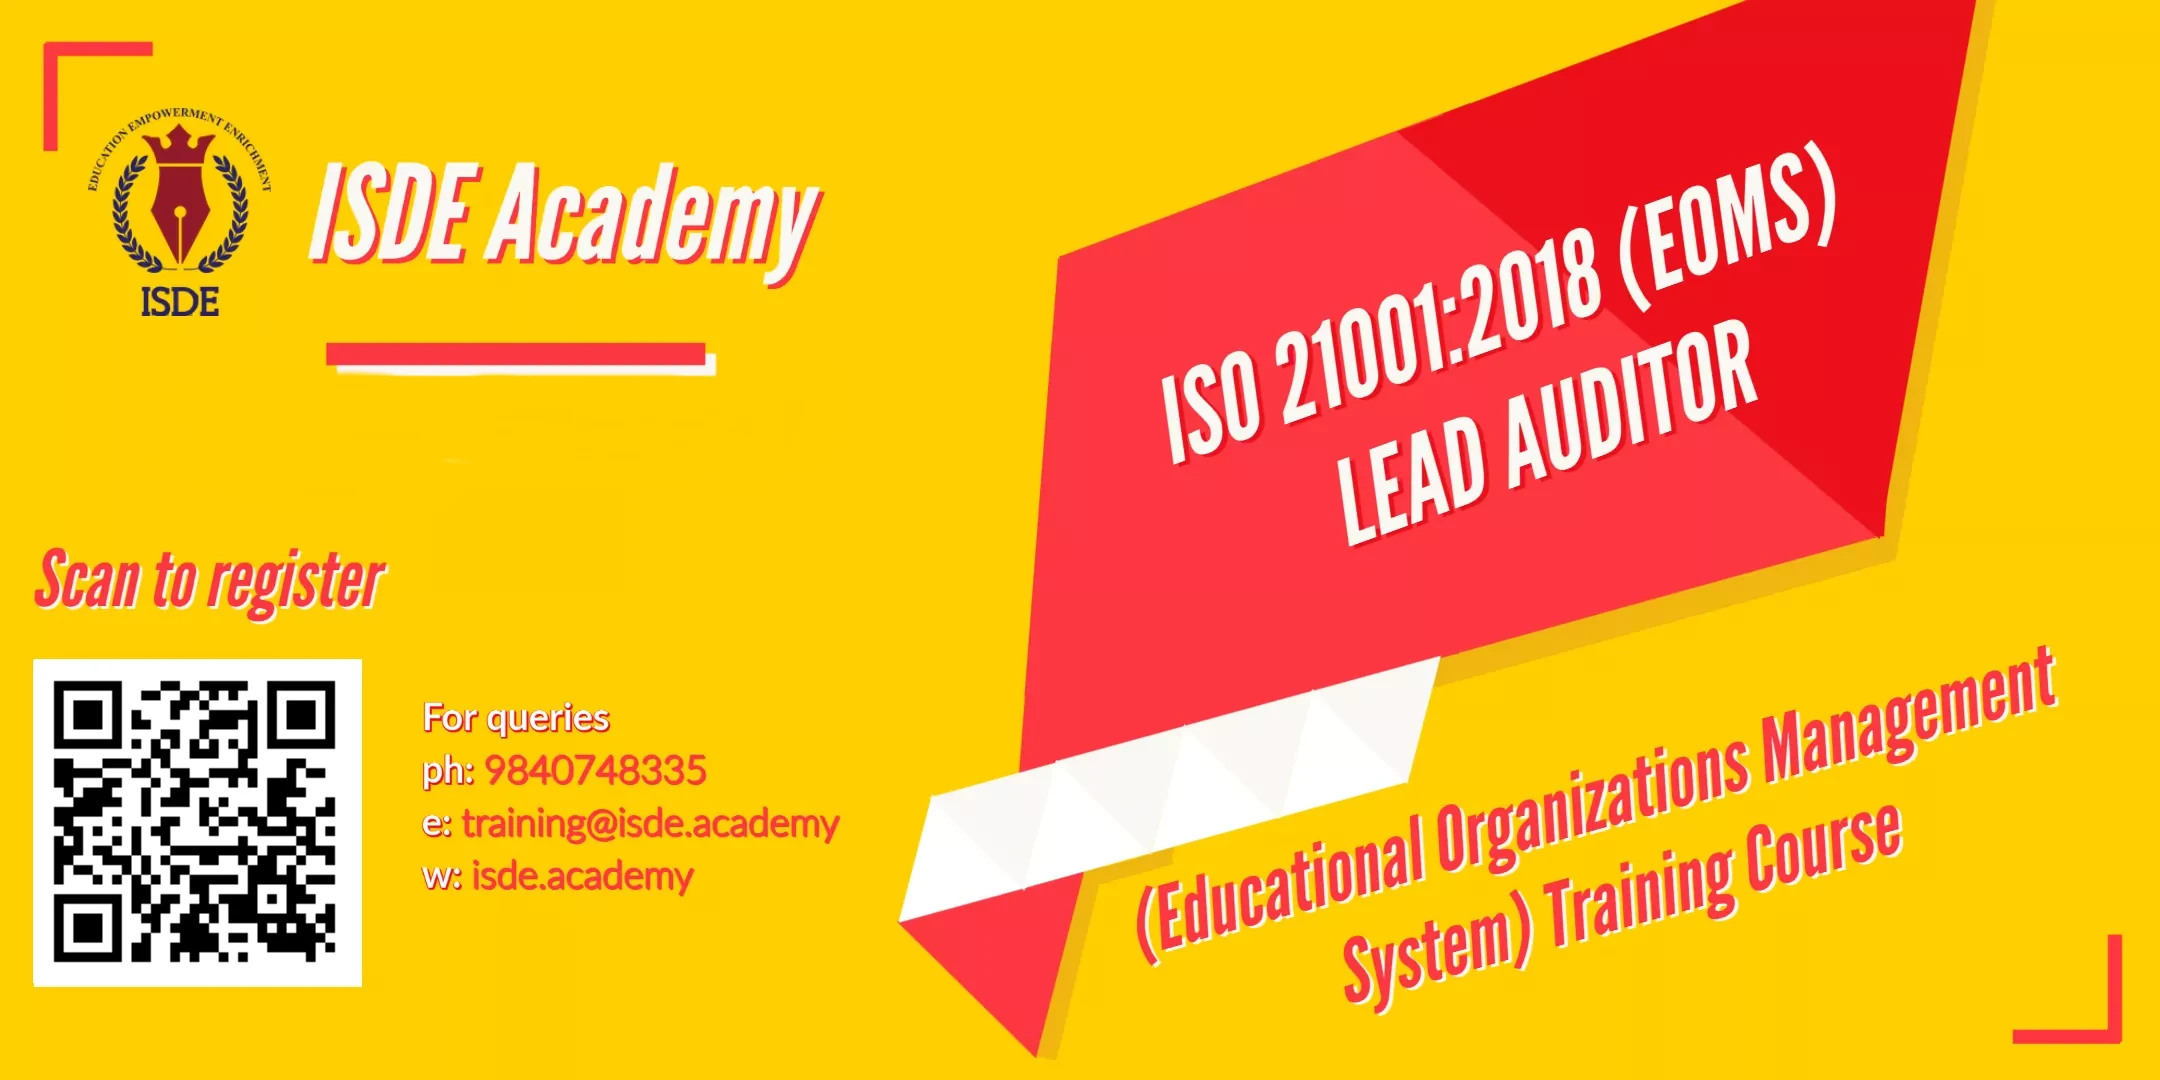 ISO 21001:2018 Lead Auditor Training Course (Food Safety Management Systems) 